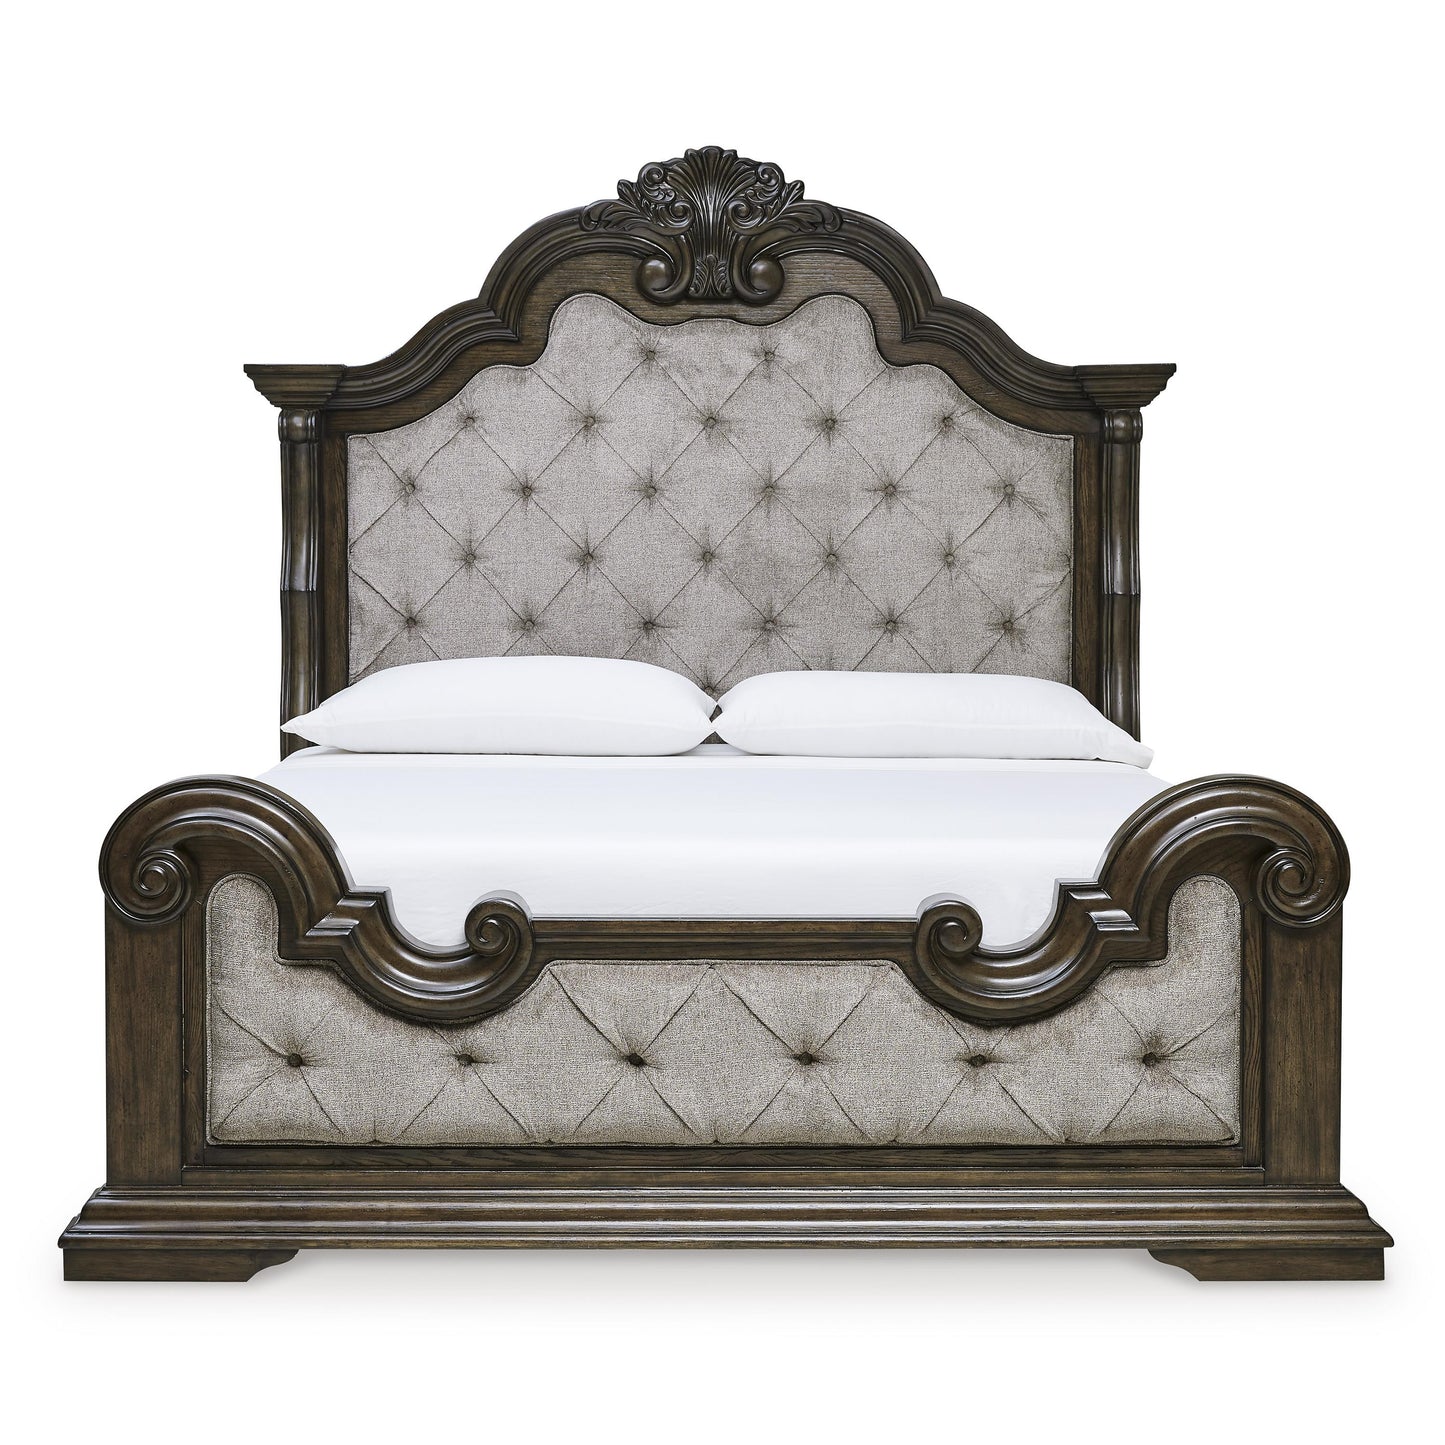 Signature Design by Ashley Maylee King Upholstered Bed B947-58/B947-56/B947-97 IMAGE 2